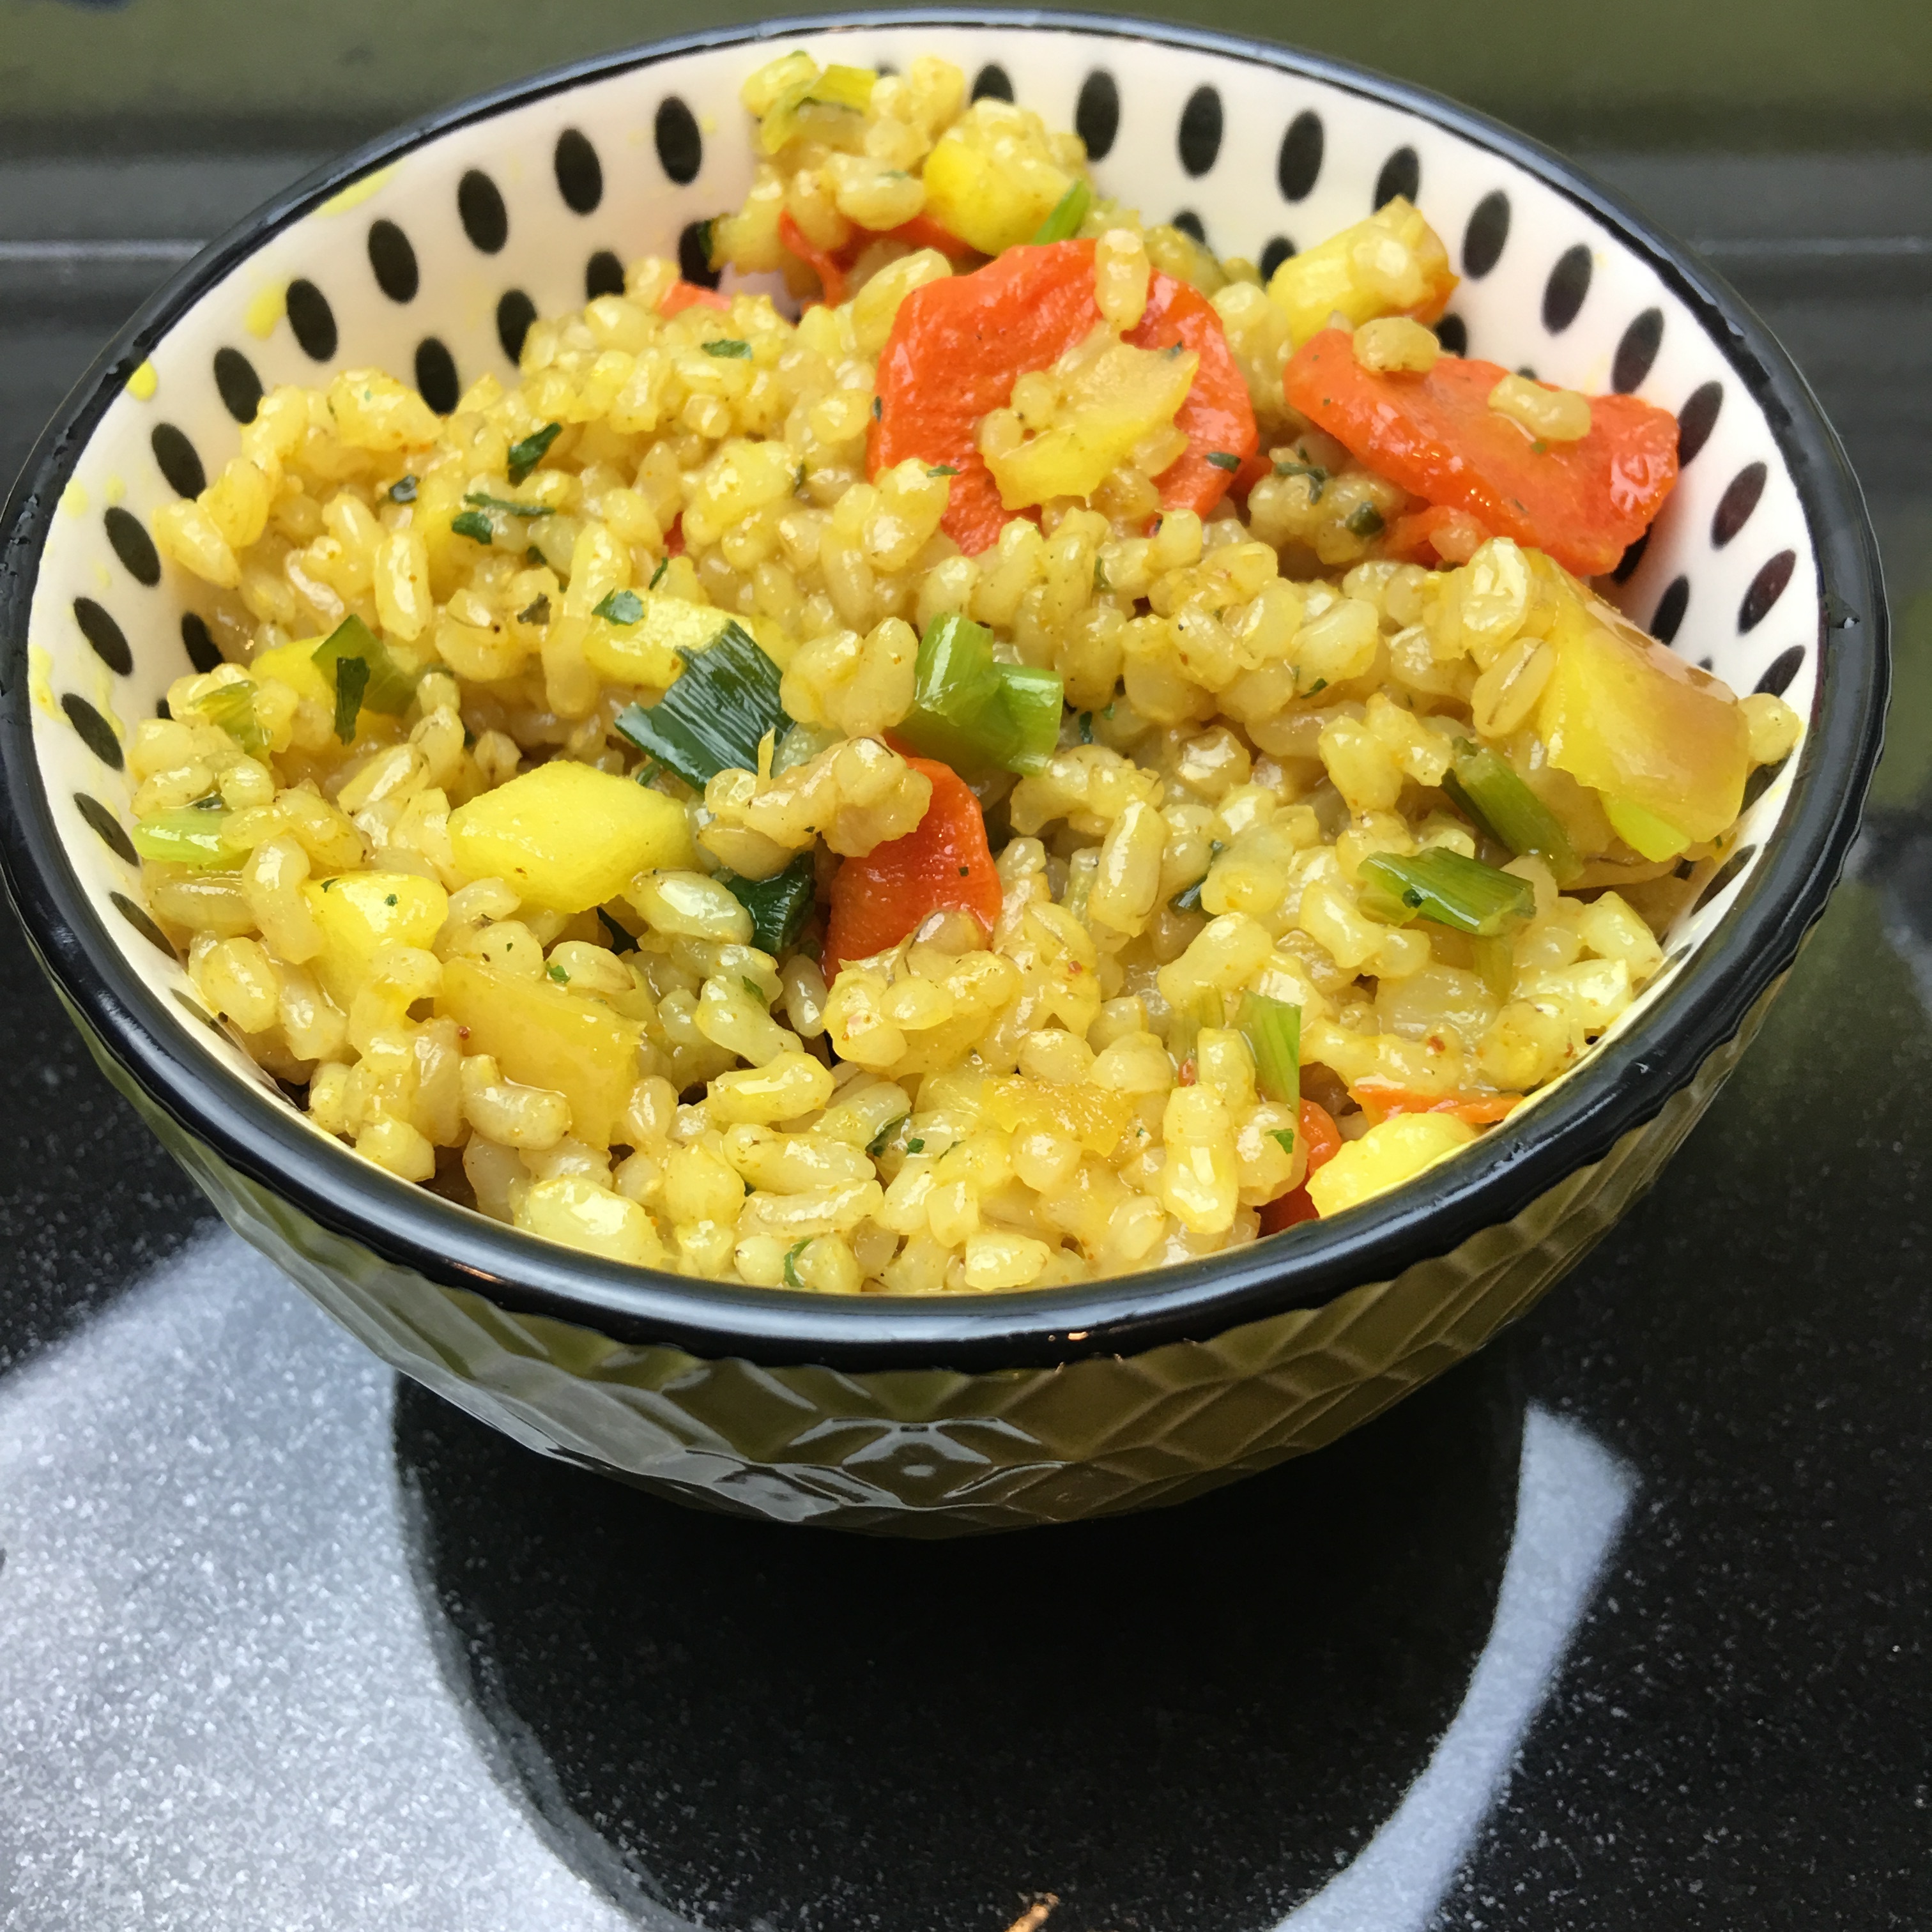 Allergy Free, Vegan Curried Fried Rice by The Allergy Chef